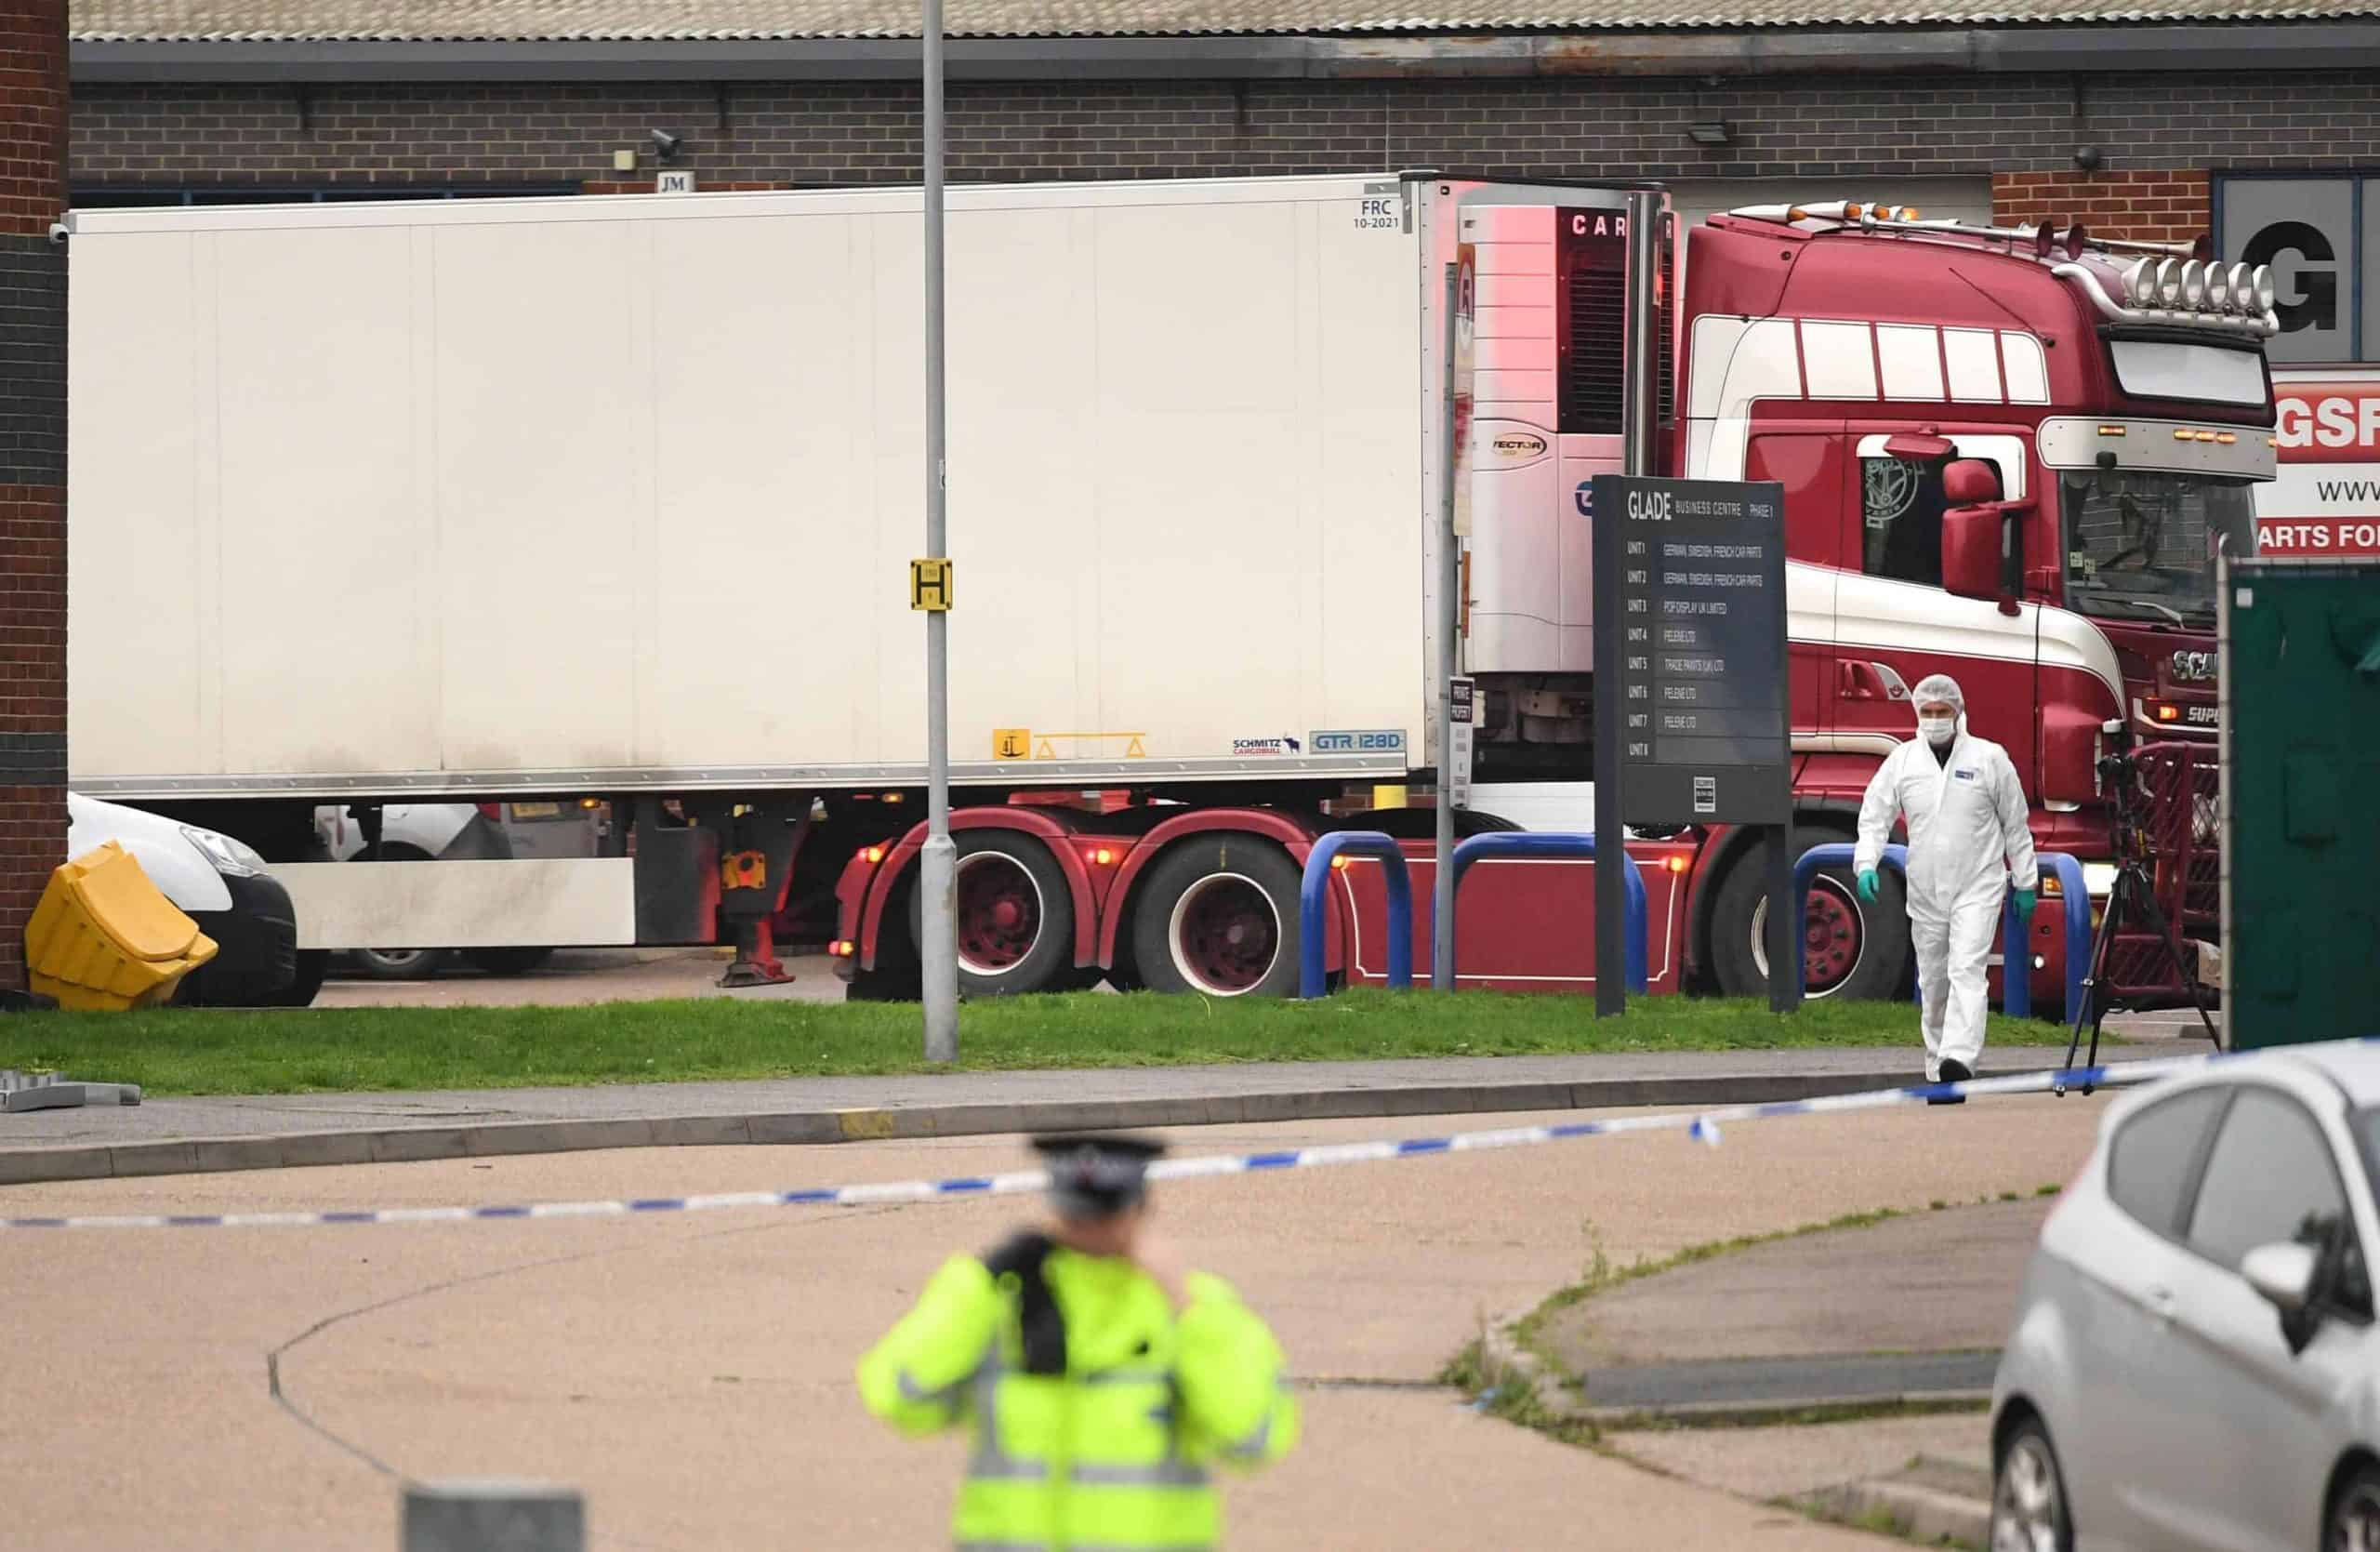 Daily Mail readers’ responses to 39 people who died in lorry is shocking